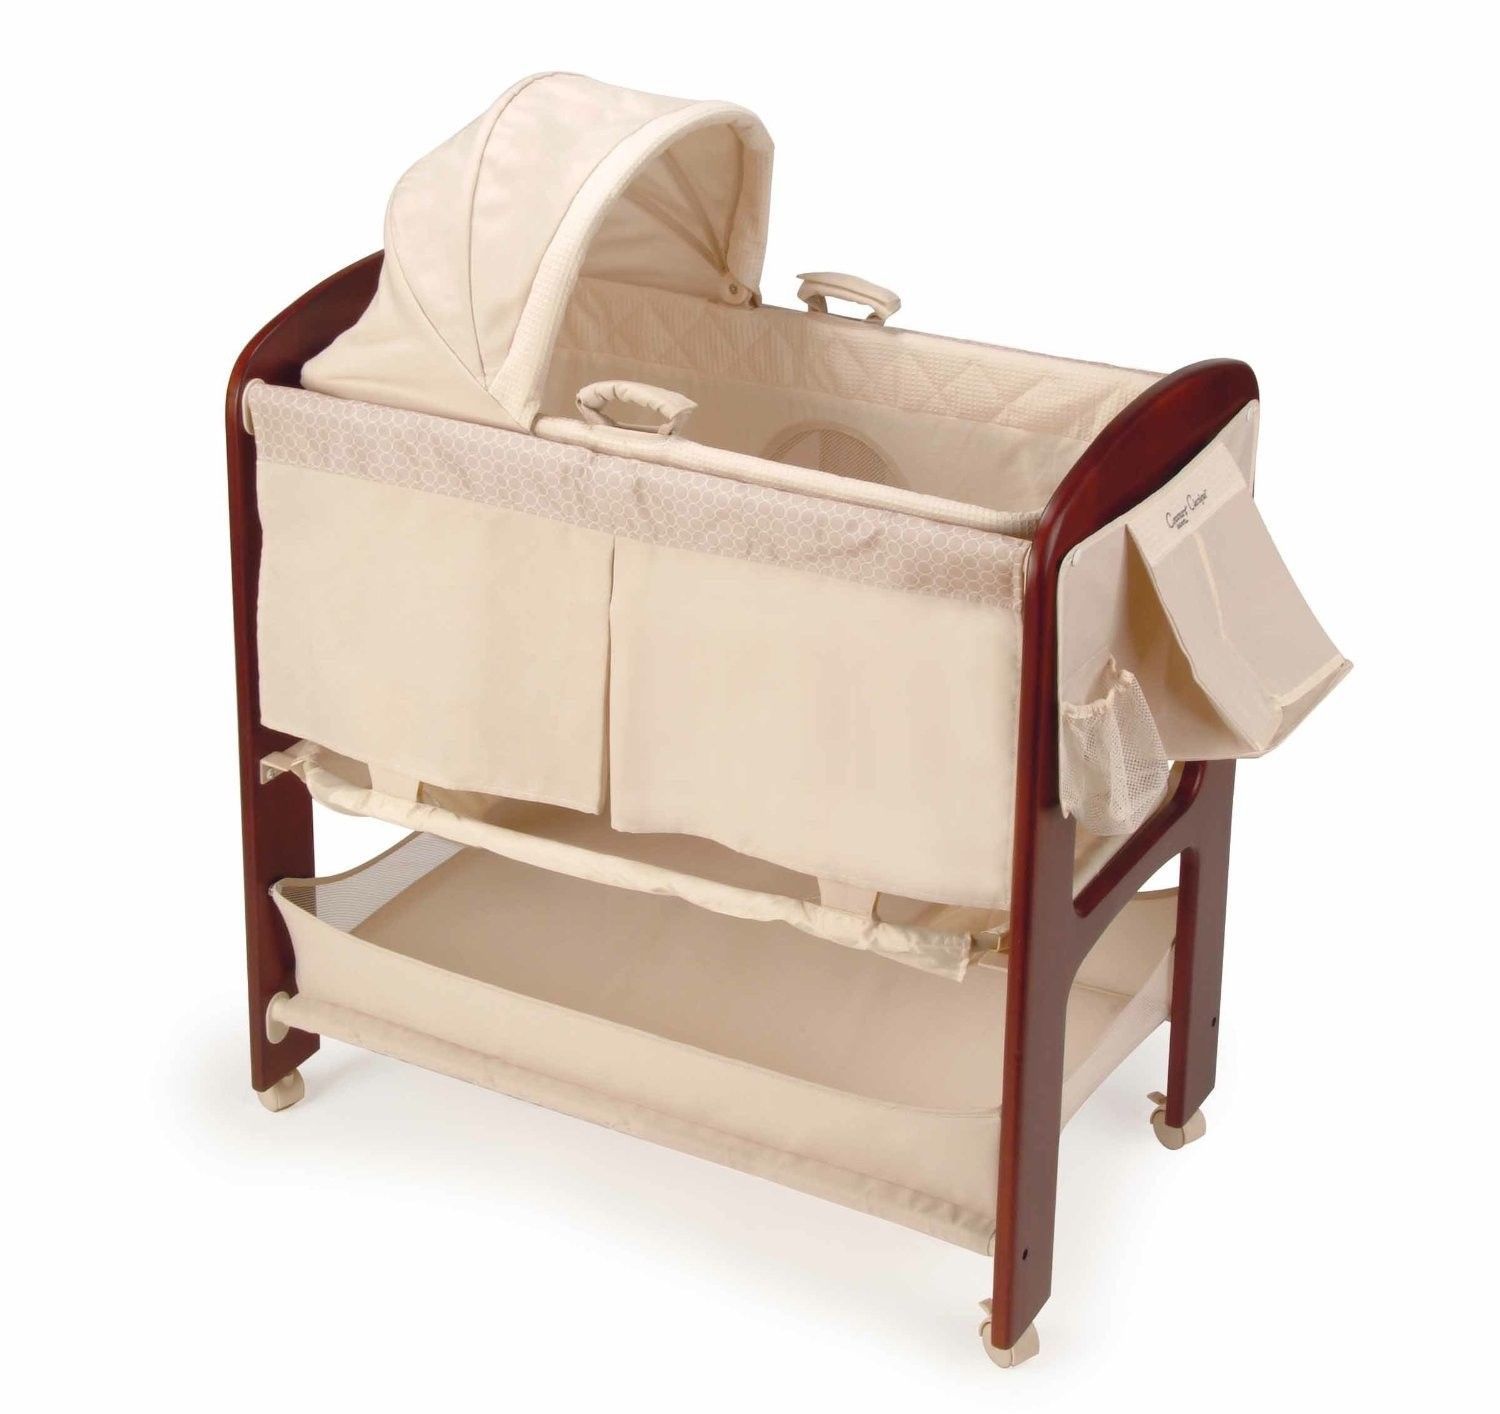 Bassinet/changing table 